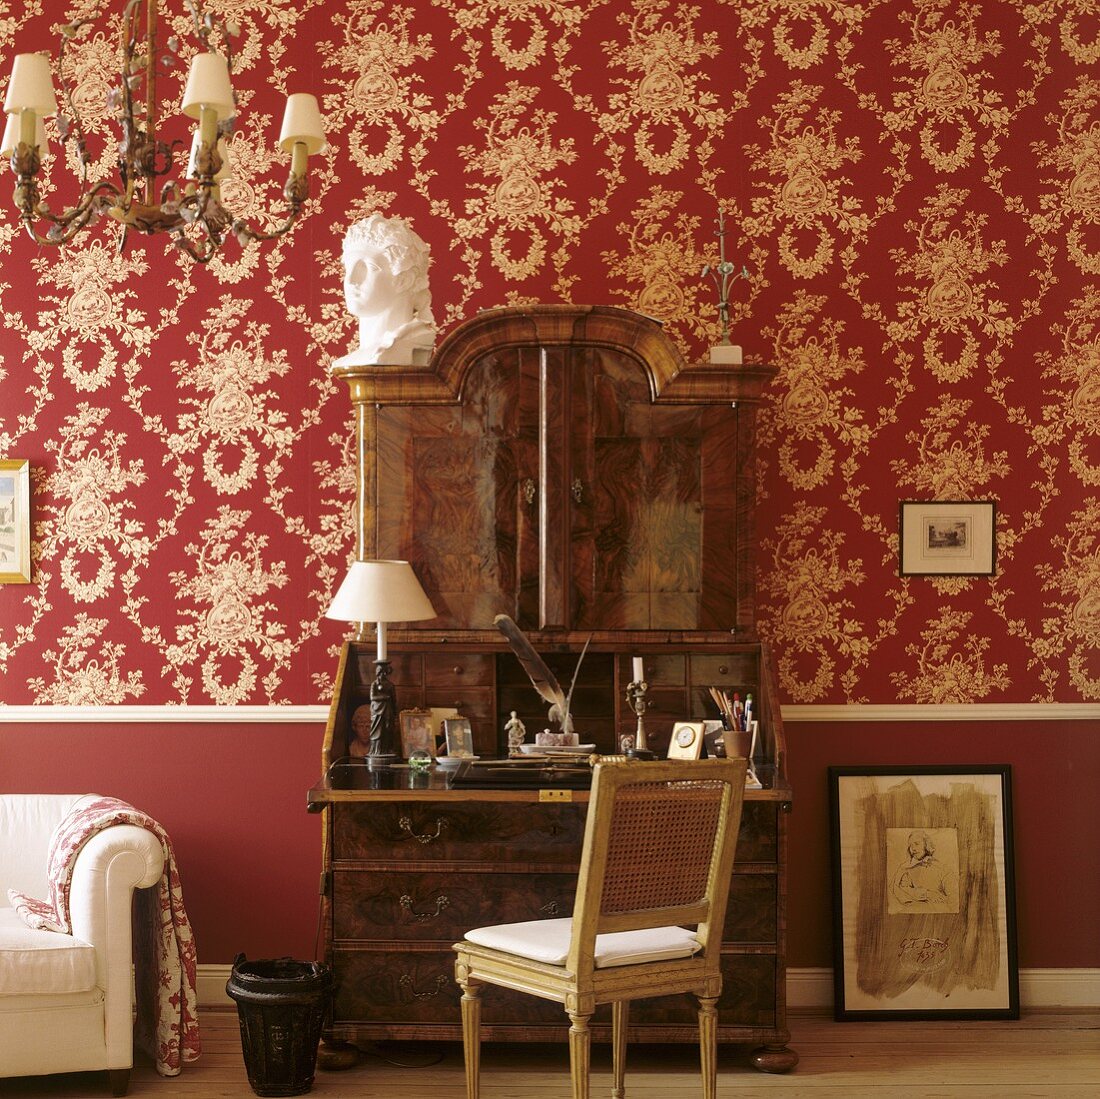 An antique wooden davenport against a wall papered with decorative red and white paper